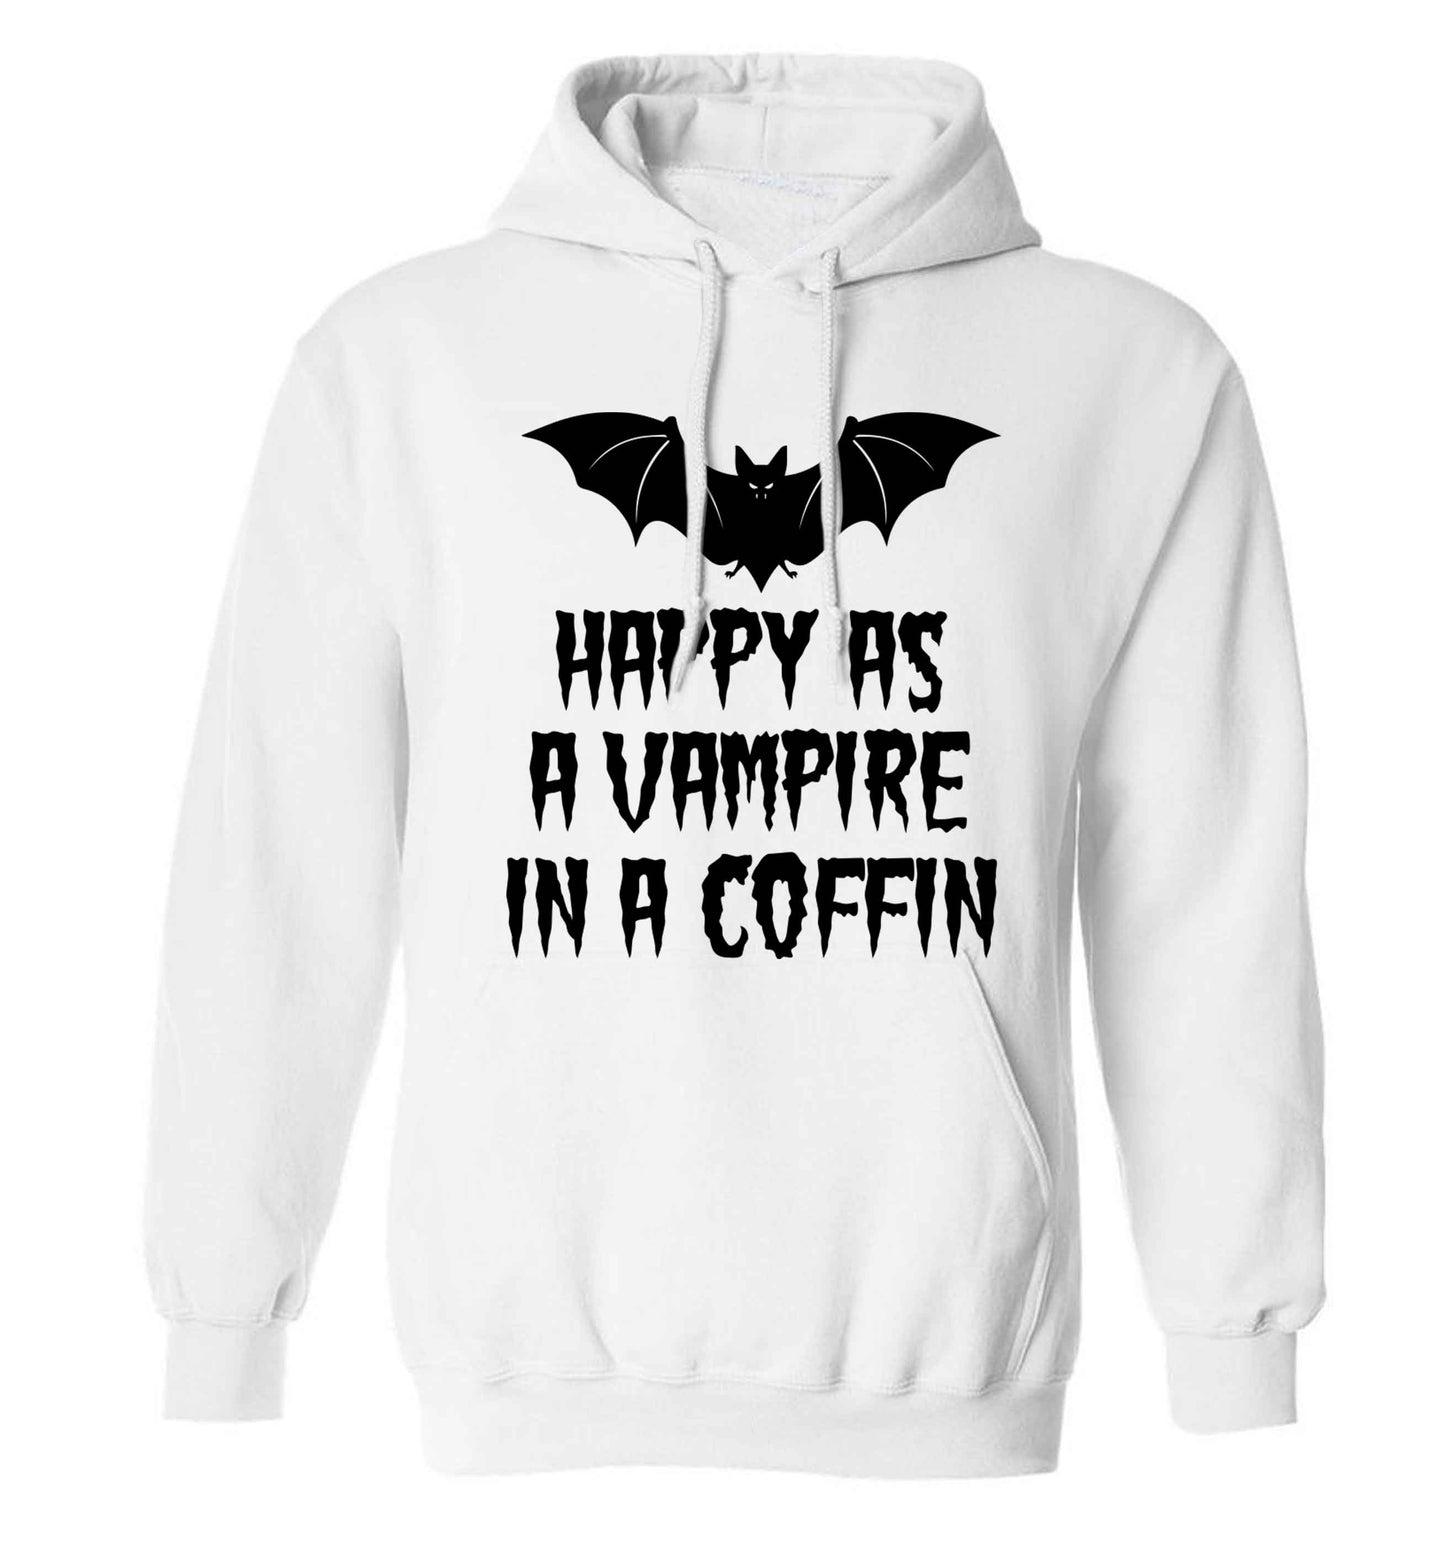 Happy as a vampire in a coffin adults unisex white hoodie 2XL